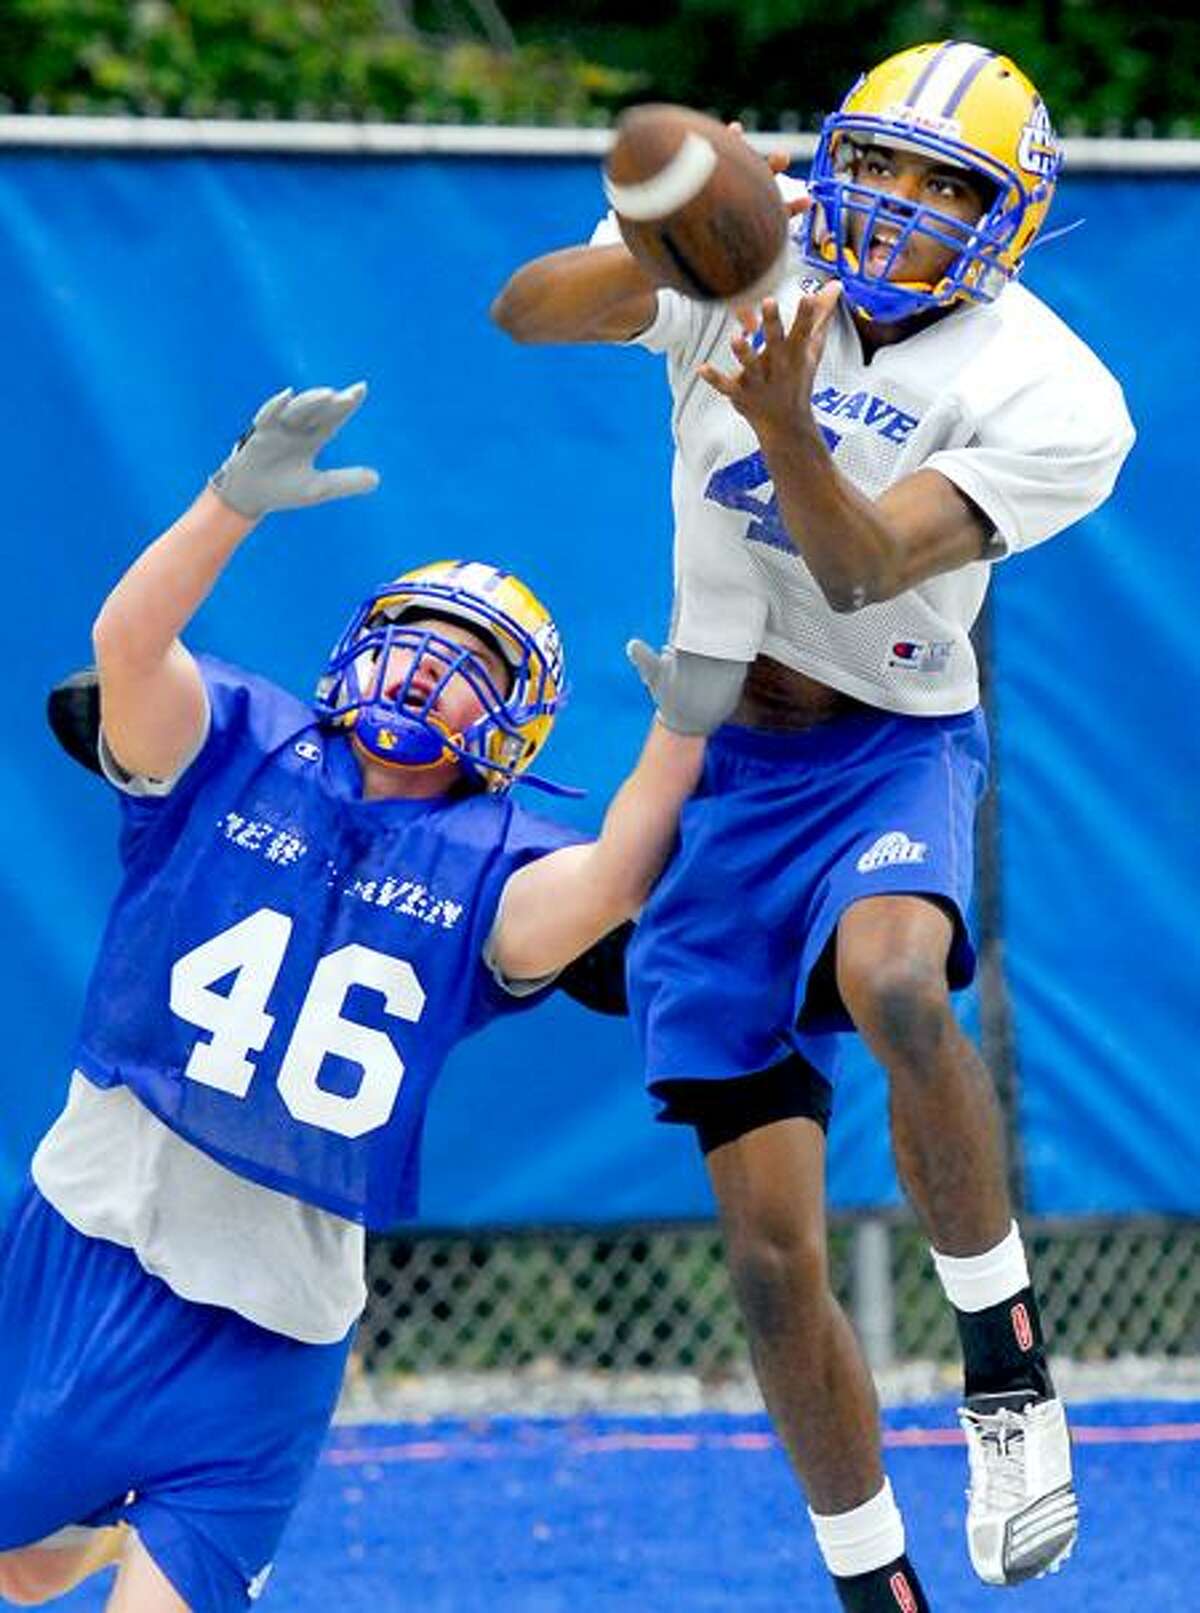 Jason Thompson (right) catches a pass over defender Trevor Officer during practice at UNH in West Haven on 10/12/2011.Photo by Arnold Gold/New Haven Register AG0427A